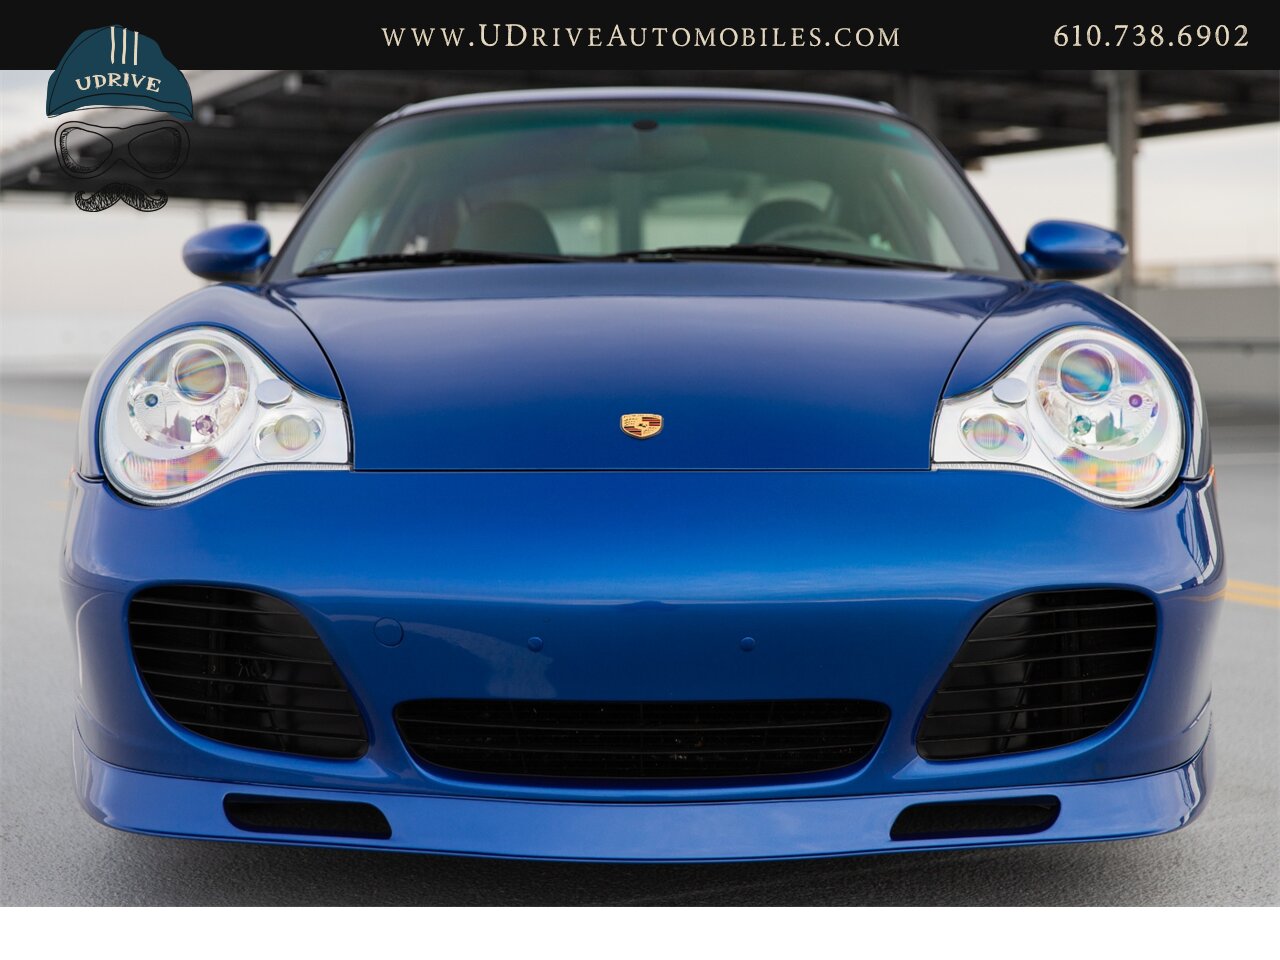 2005 Porsche 911 Turbo S Factory Aerokit Extremely Rare Cobalt Blue  Yellow Deviating Stitching 1 of a Kind Spec $160k MSRP - Photo 14 - West Chester, PA 19382